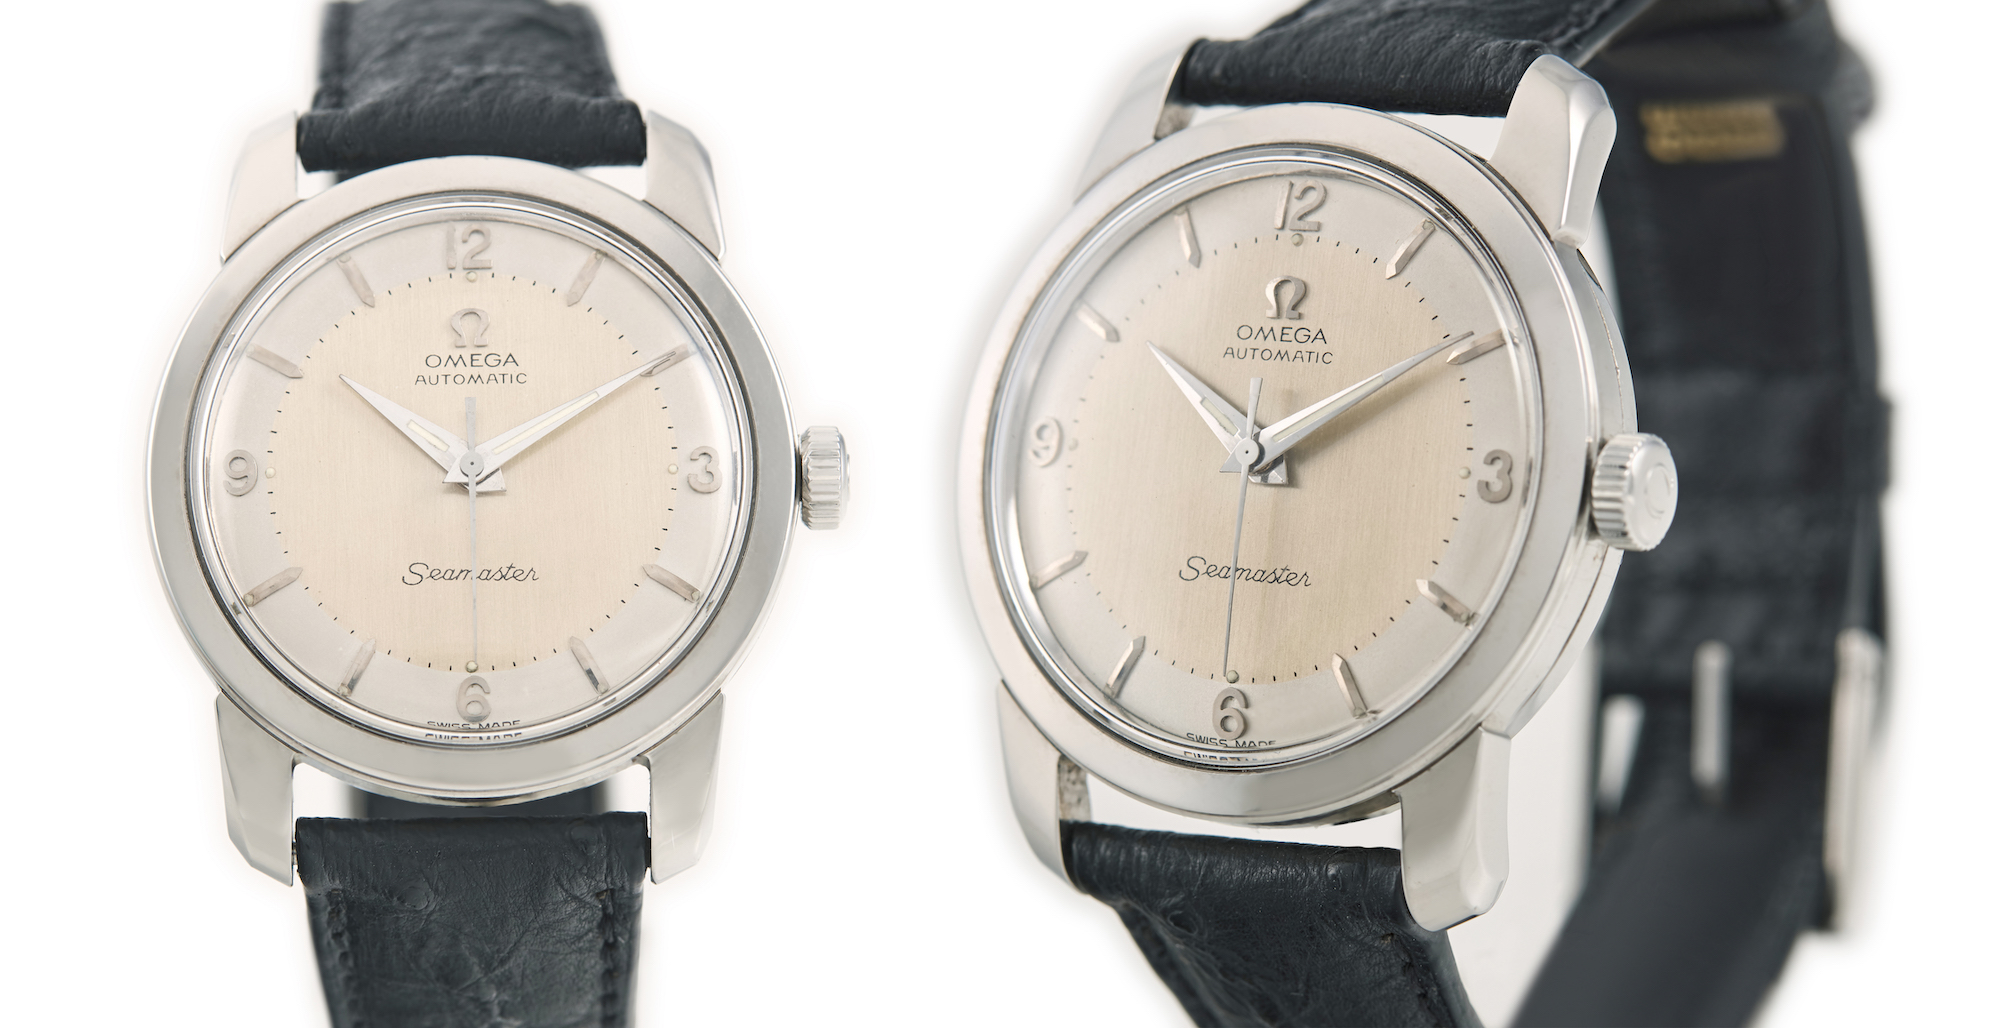 Omega Seamaster wristwatch from 1955